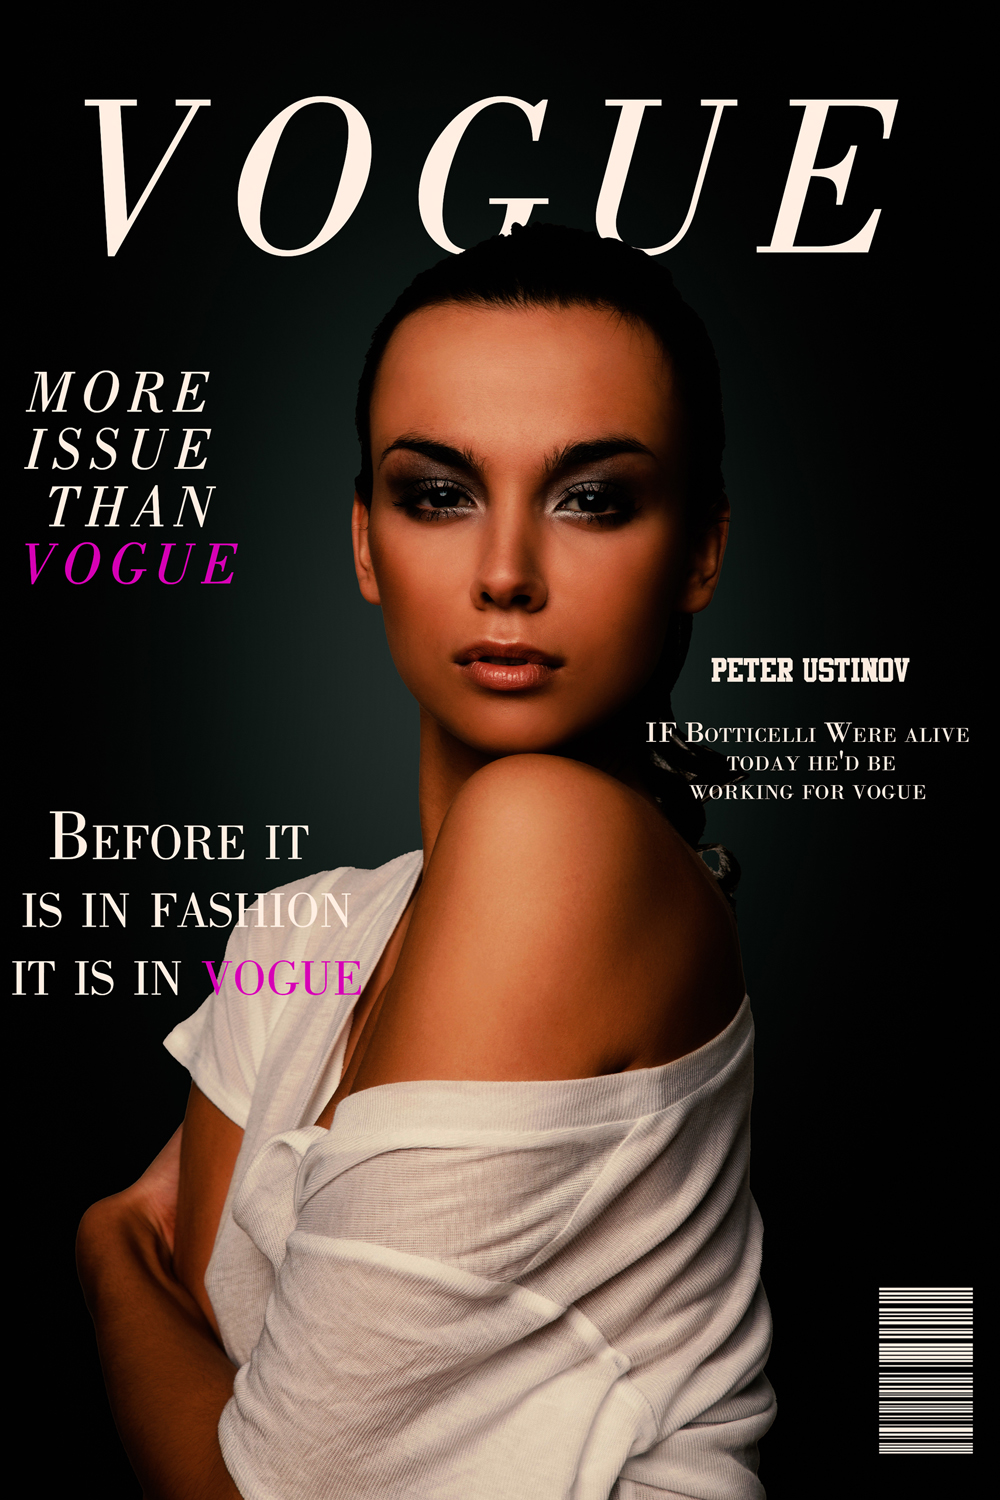 magazine cover design with jpg, psd and mockup file pinterest preview image.